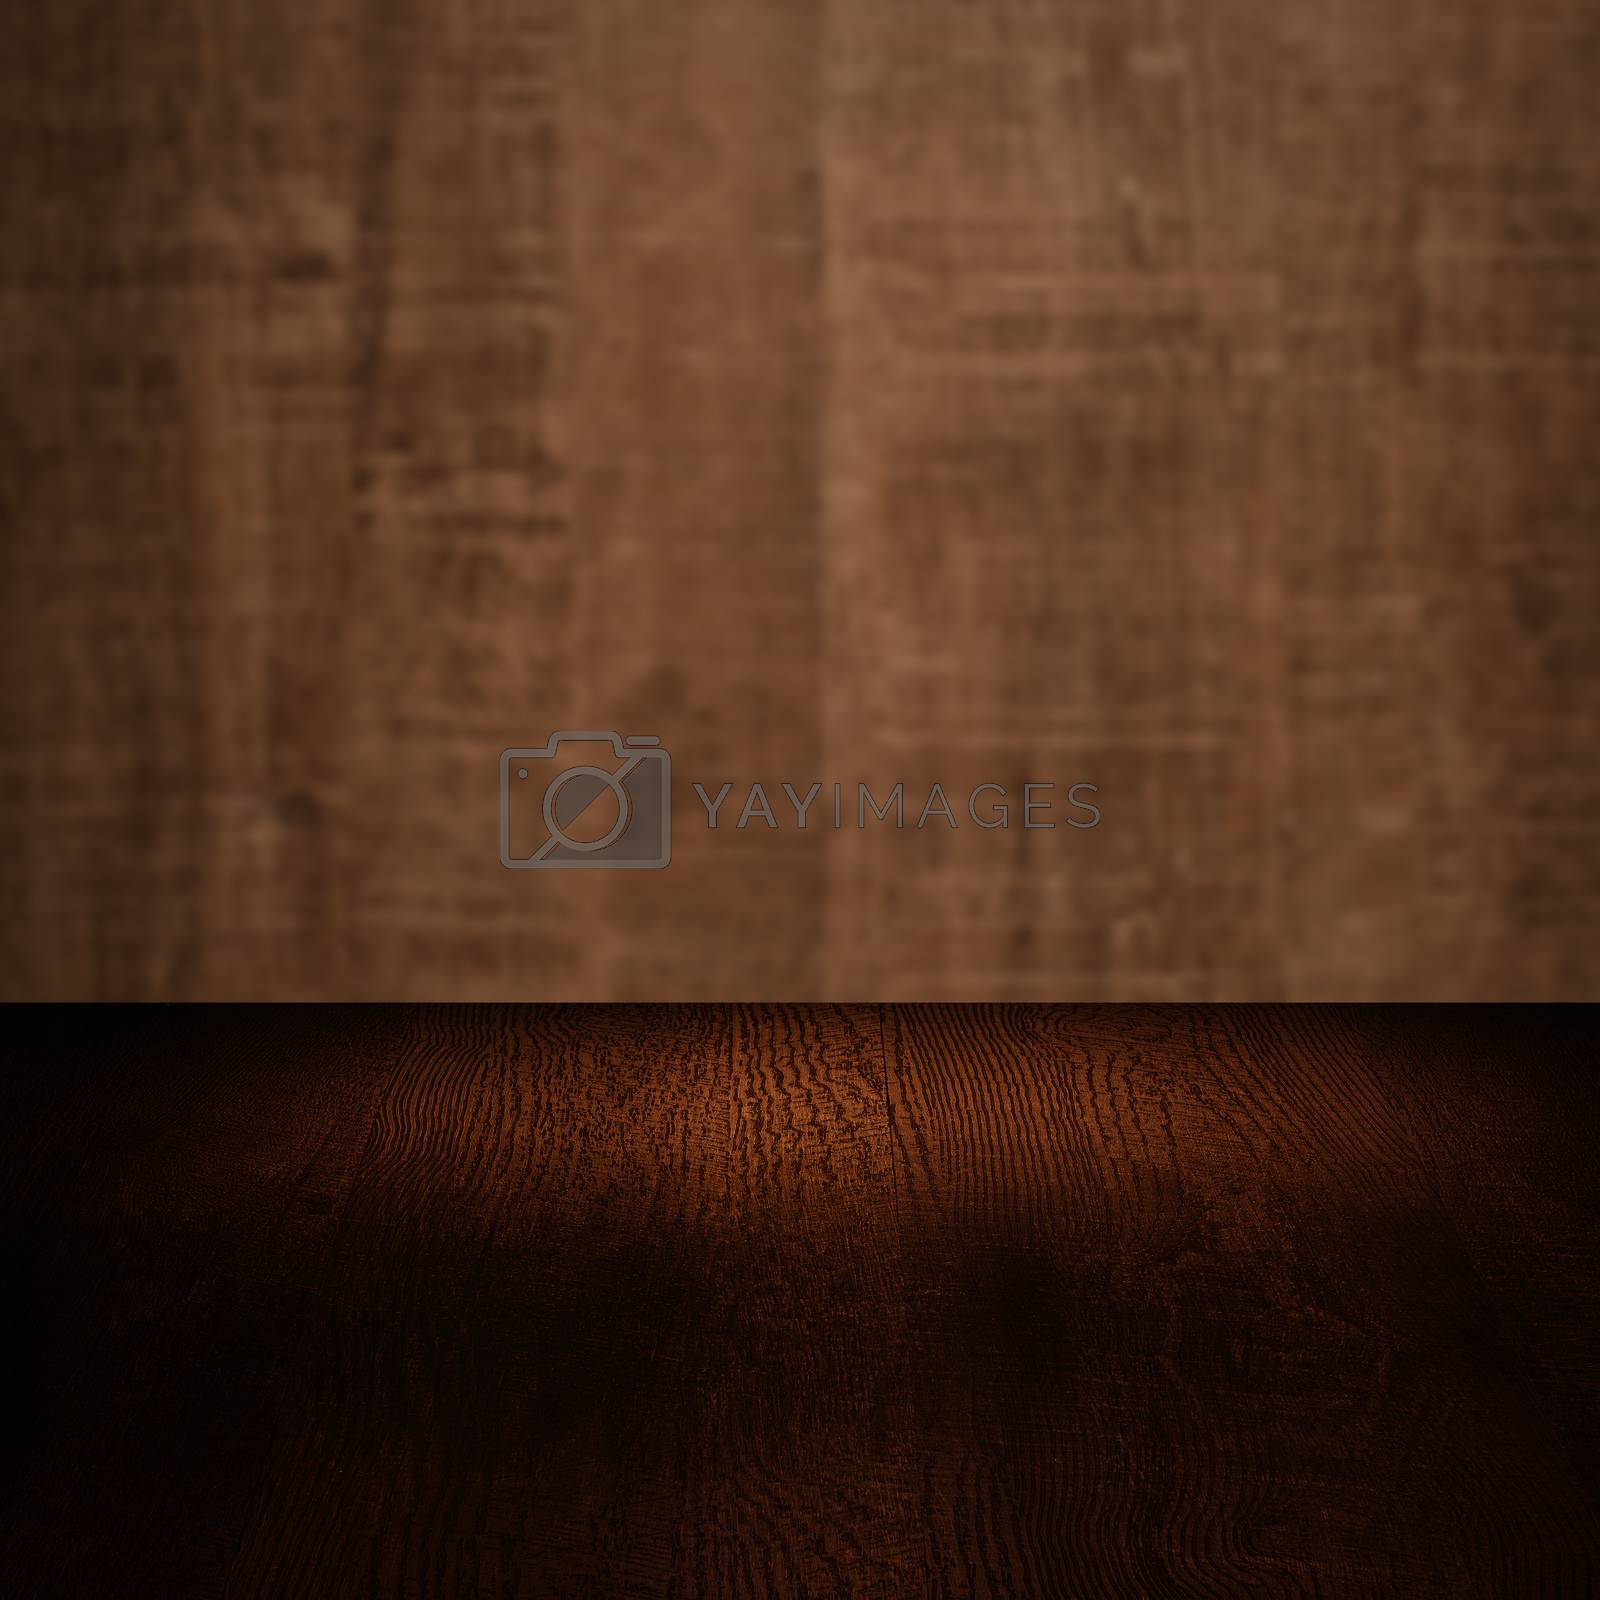 Royalty free image of Wood background  by homydesign